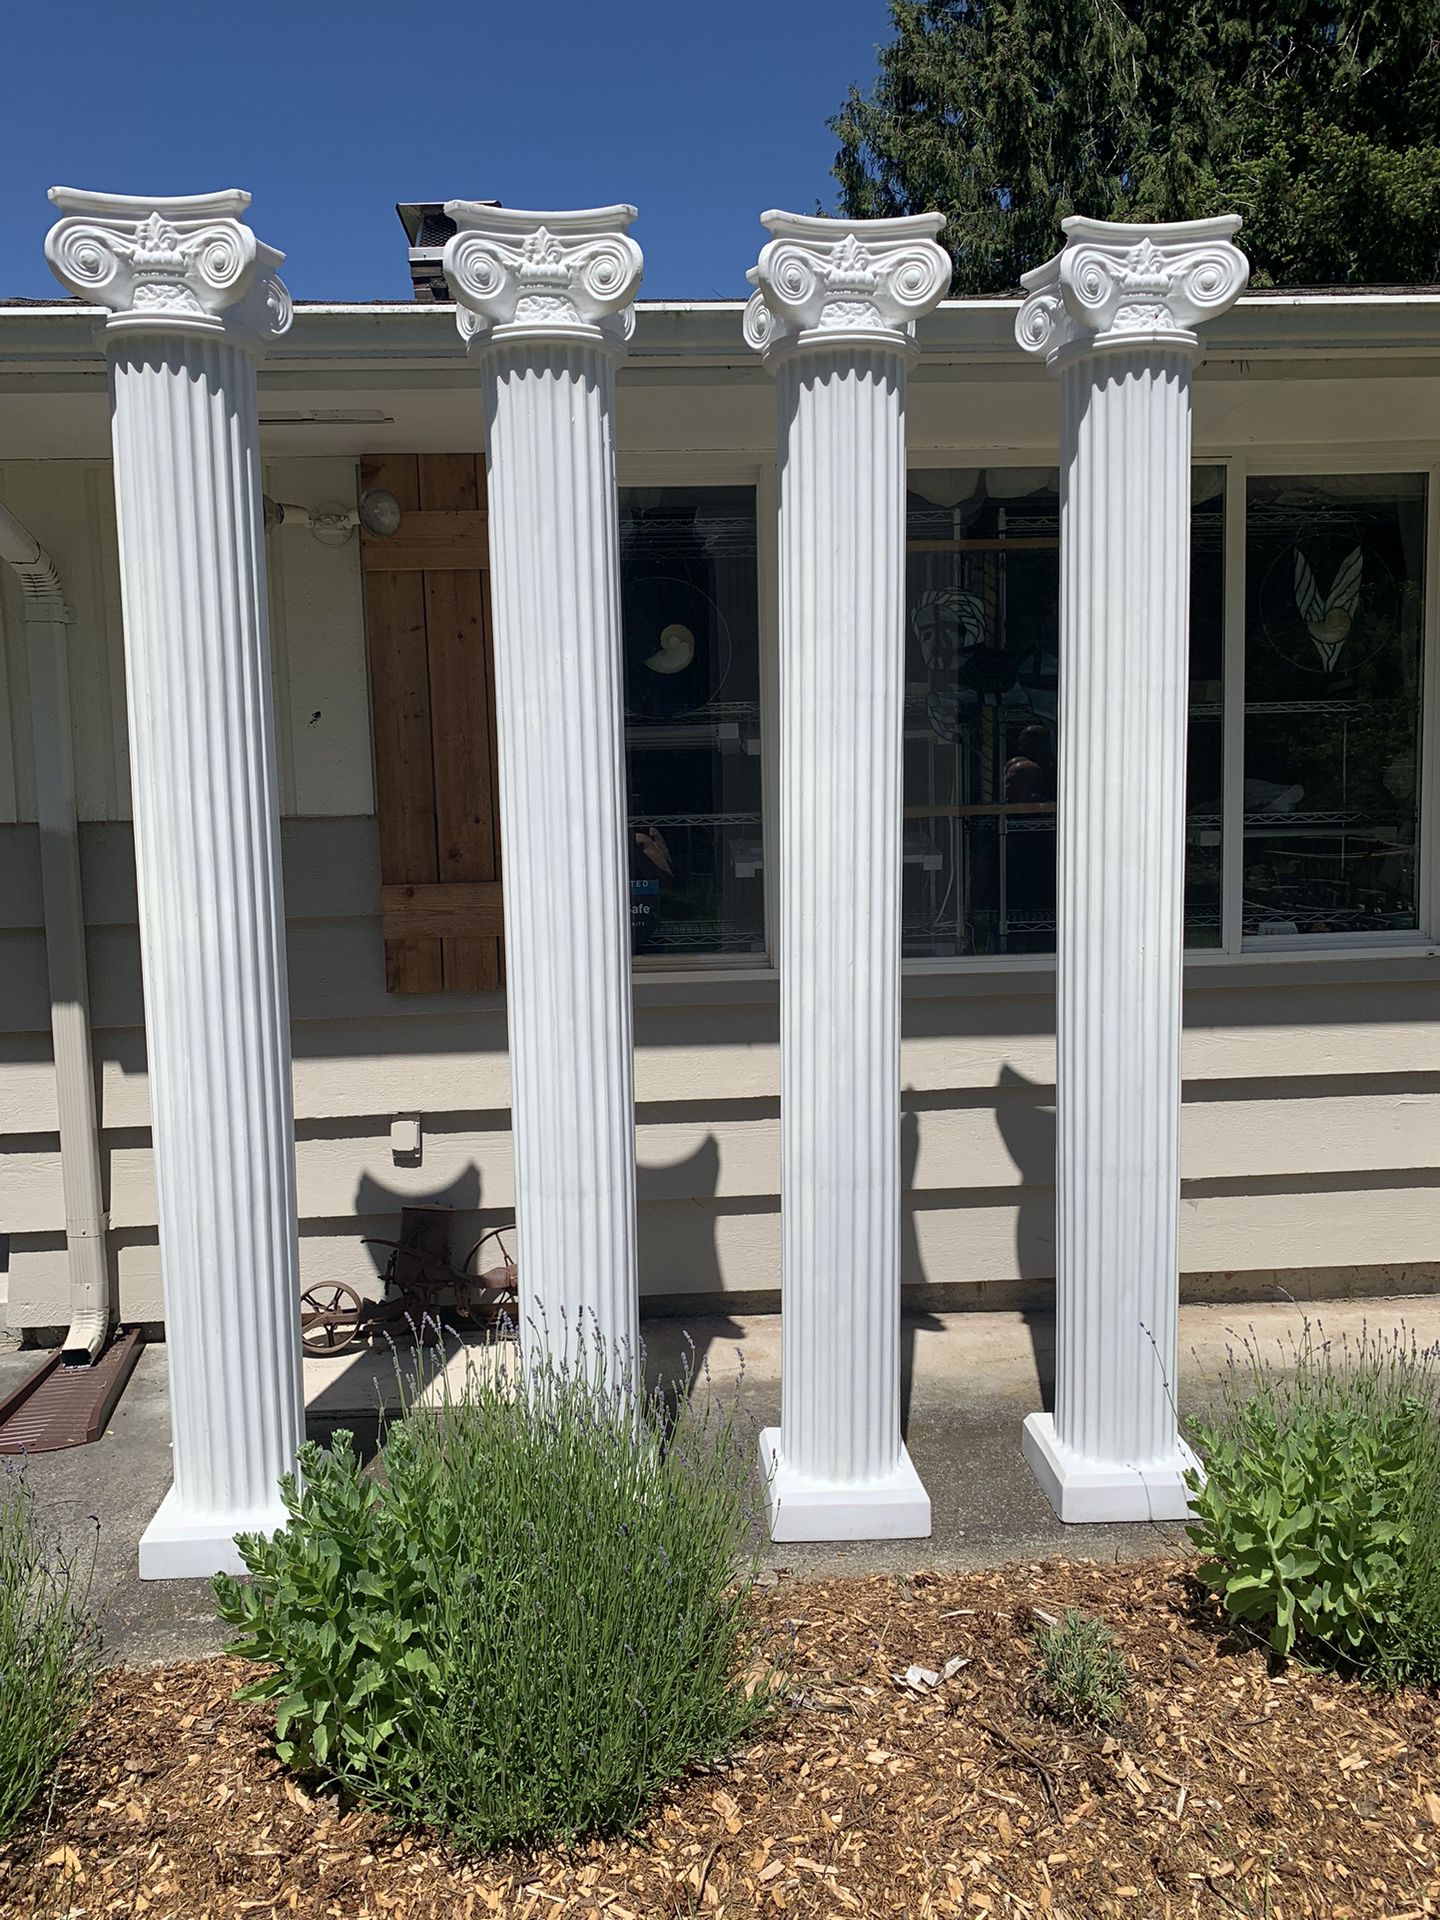 Columns For Sale. Could Be Used For Wedding, Anniversary, Bridal Shower, Or Event. 